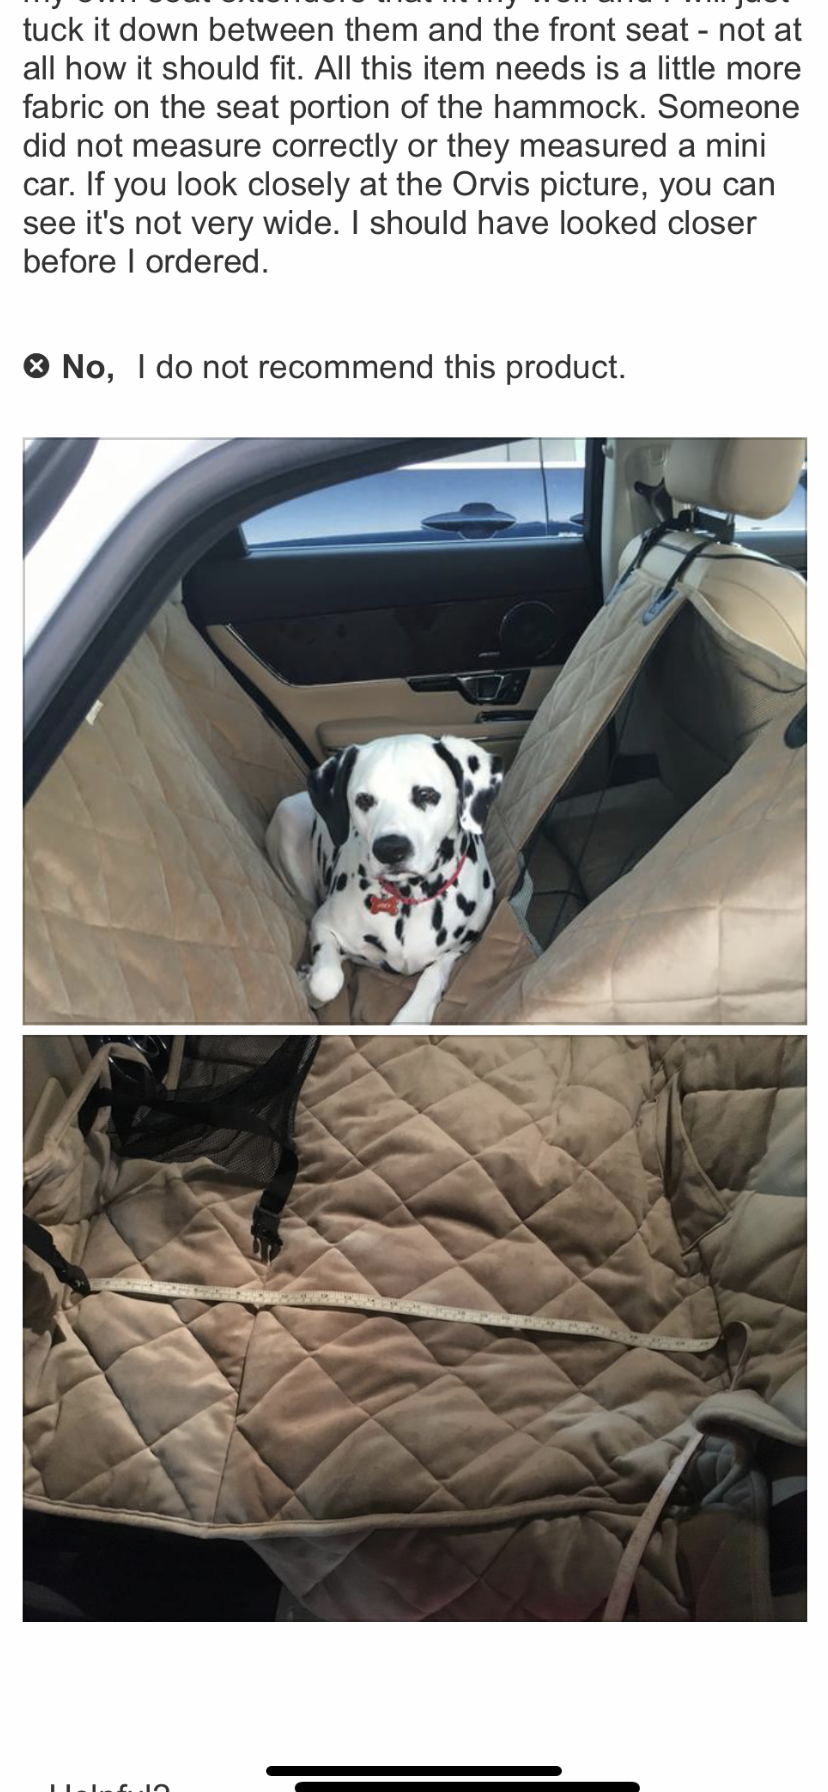 Dog pet covers for rear seats or trunk area | Tesla Motors Club